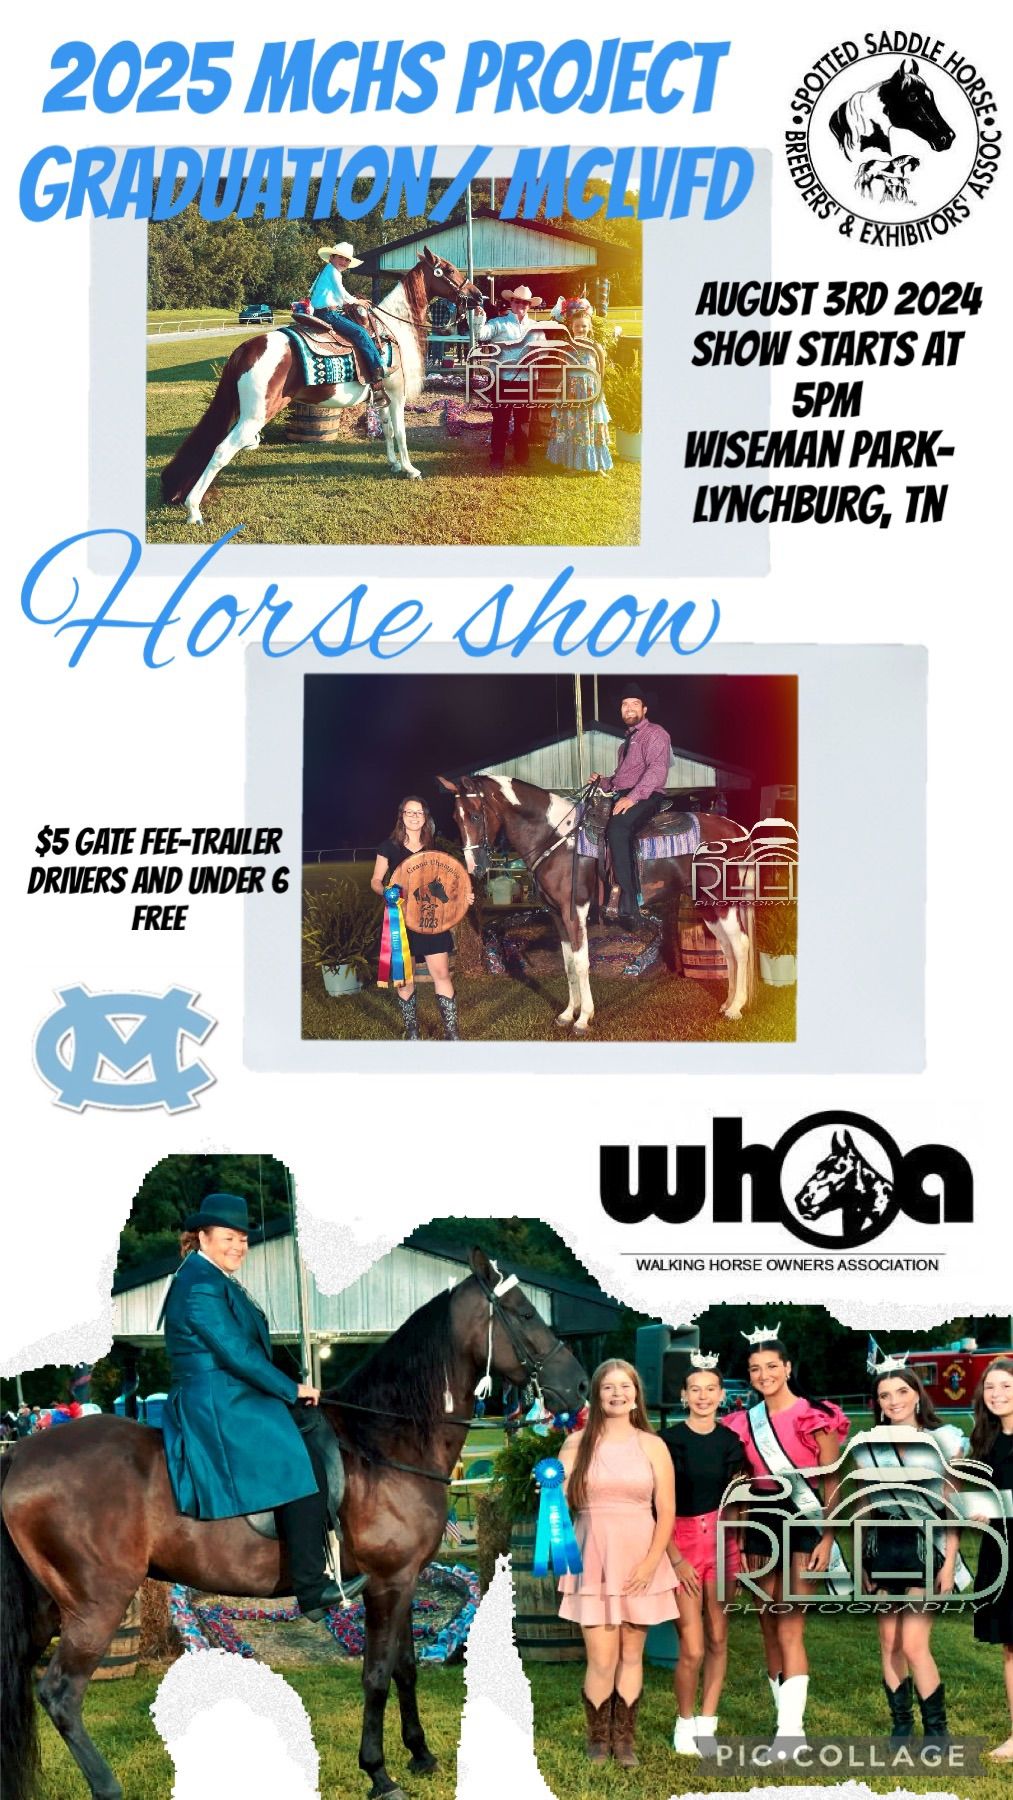 Annual Horse Show presented by MCHS 2025 Project Graduation\/MCVFD